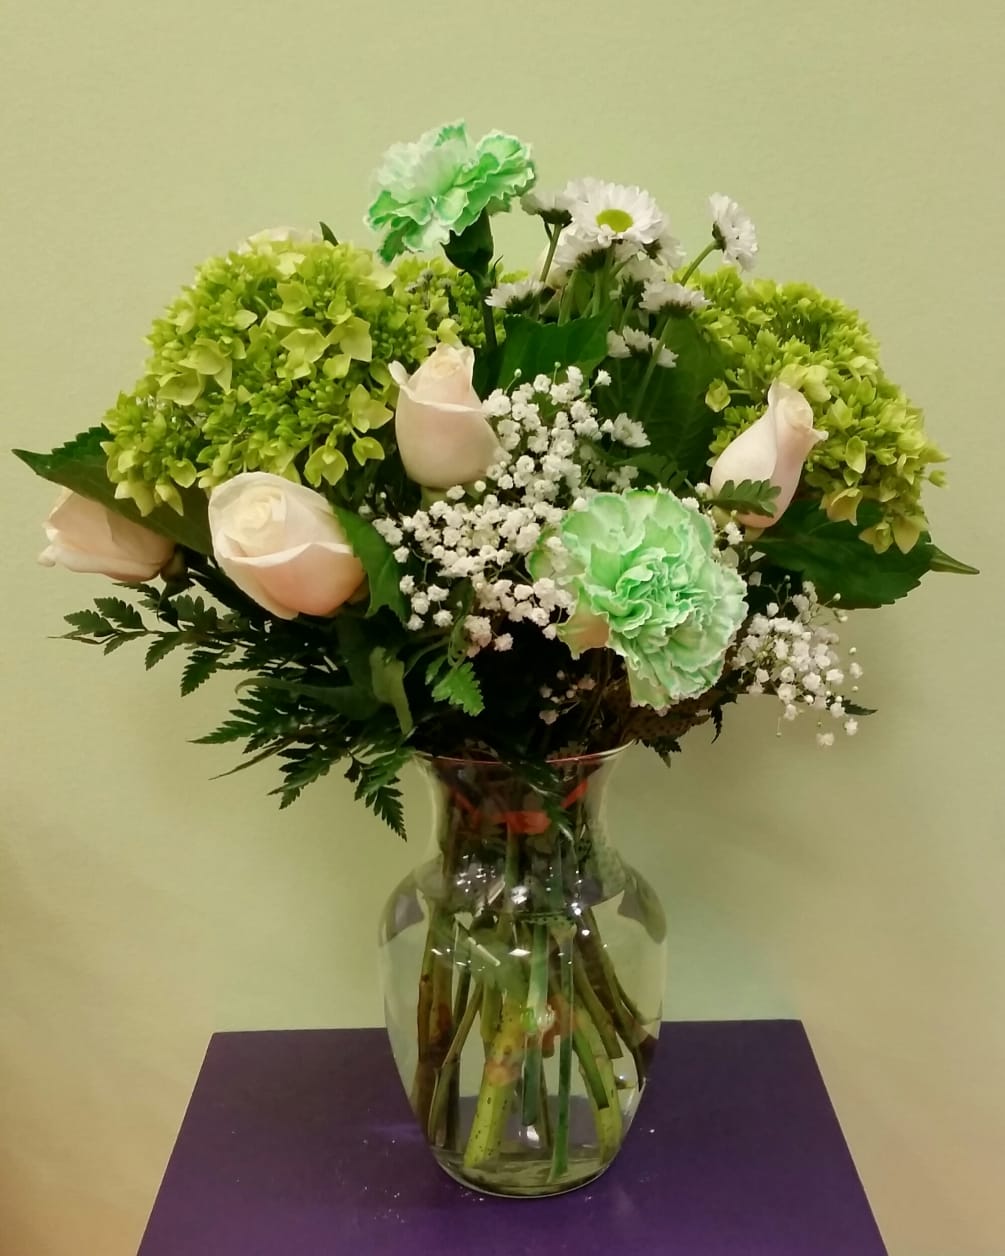 This is an elegant green and white arrangement  Include roses, hydrangeas